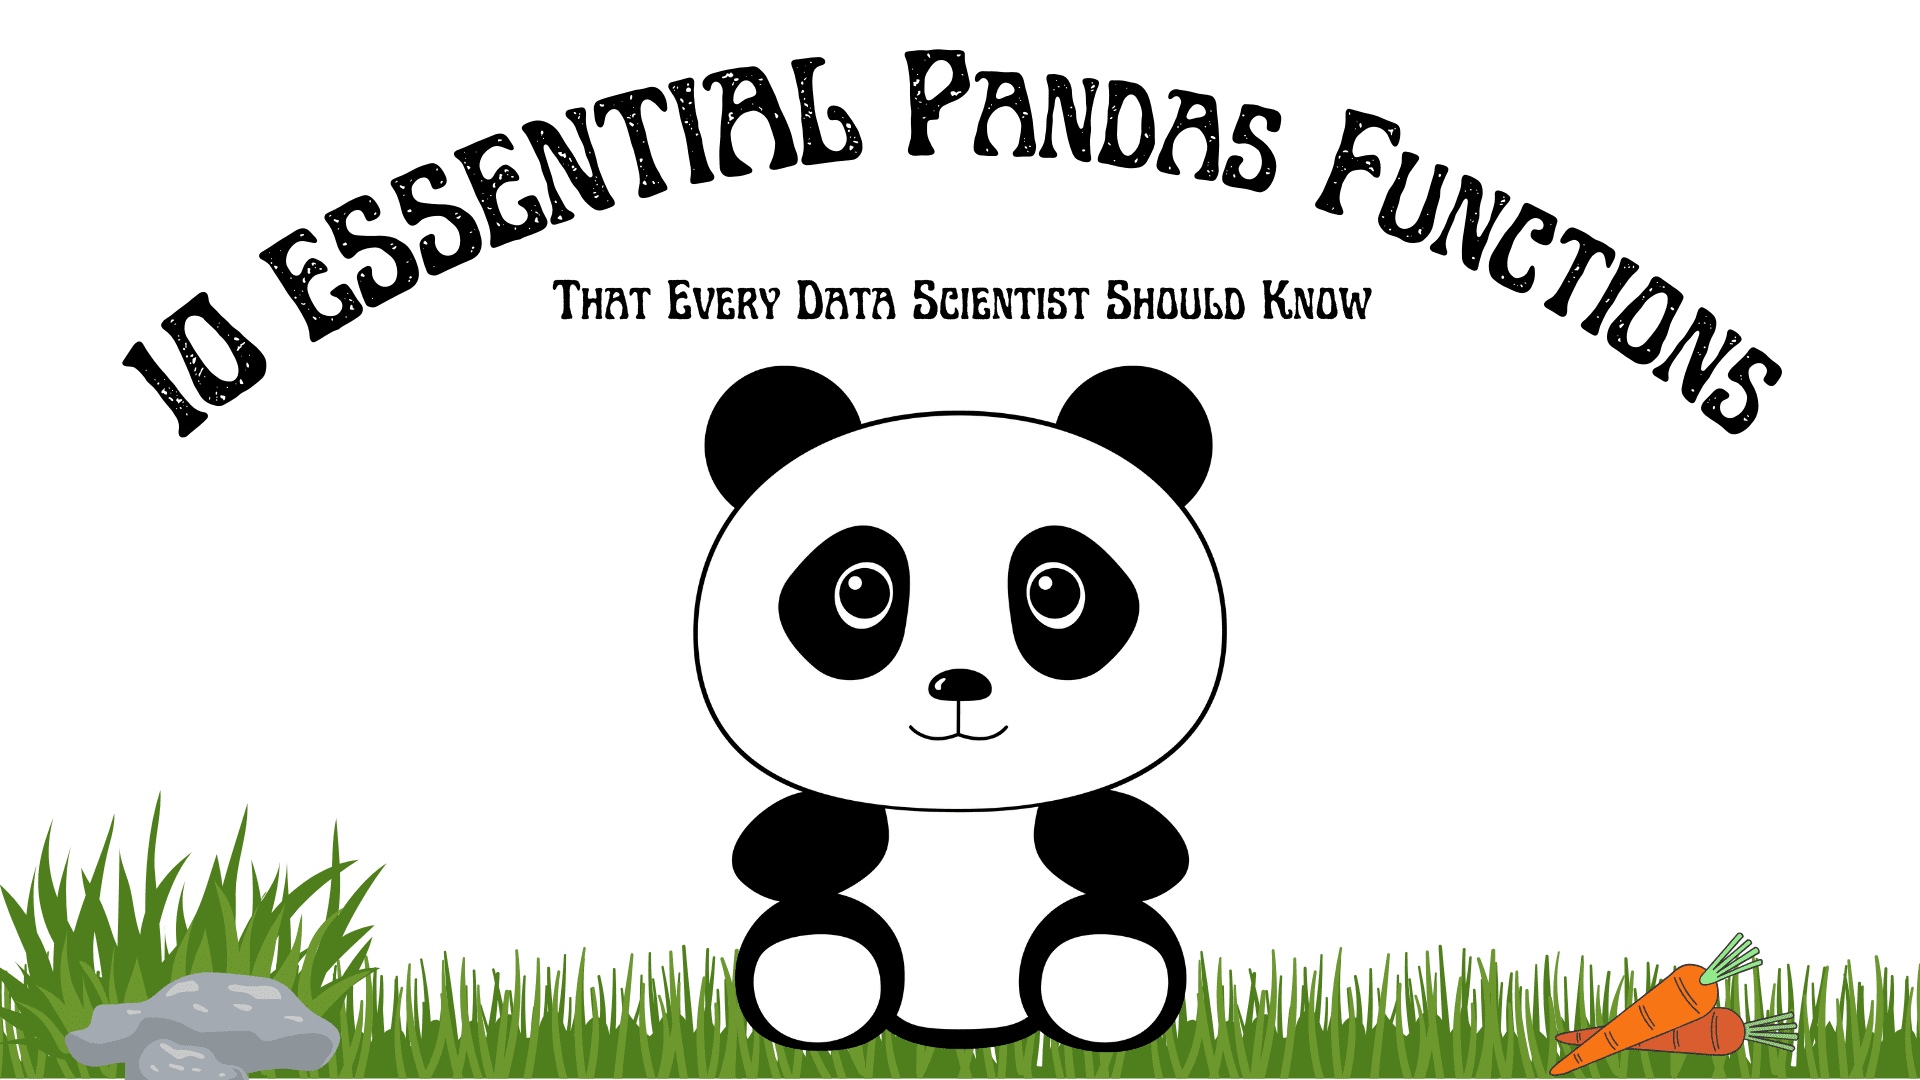 10 Essential Pandas Functions Every Data Scientist Should Know